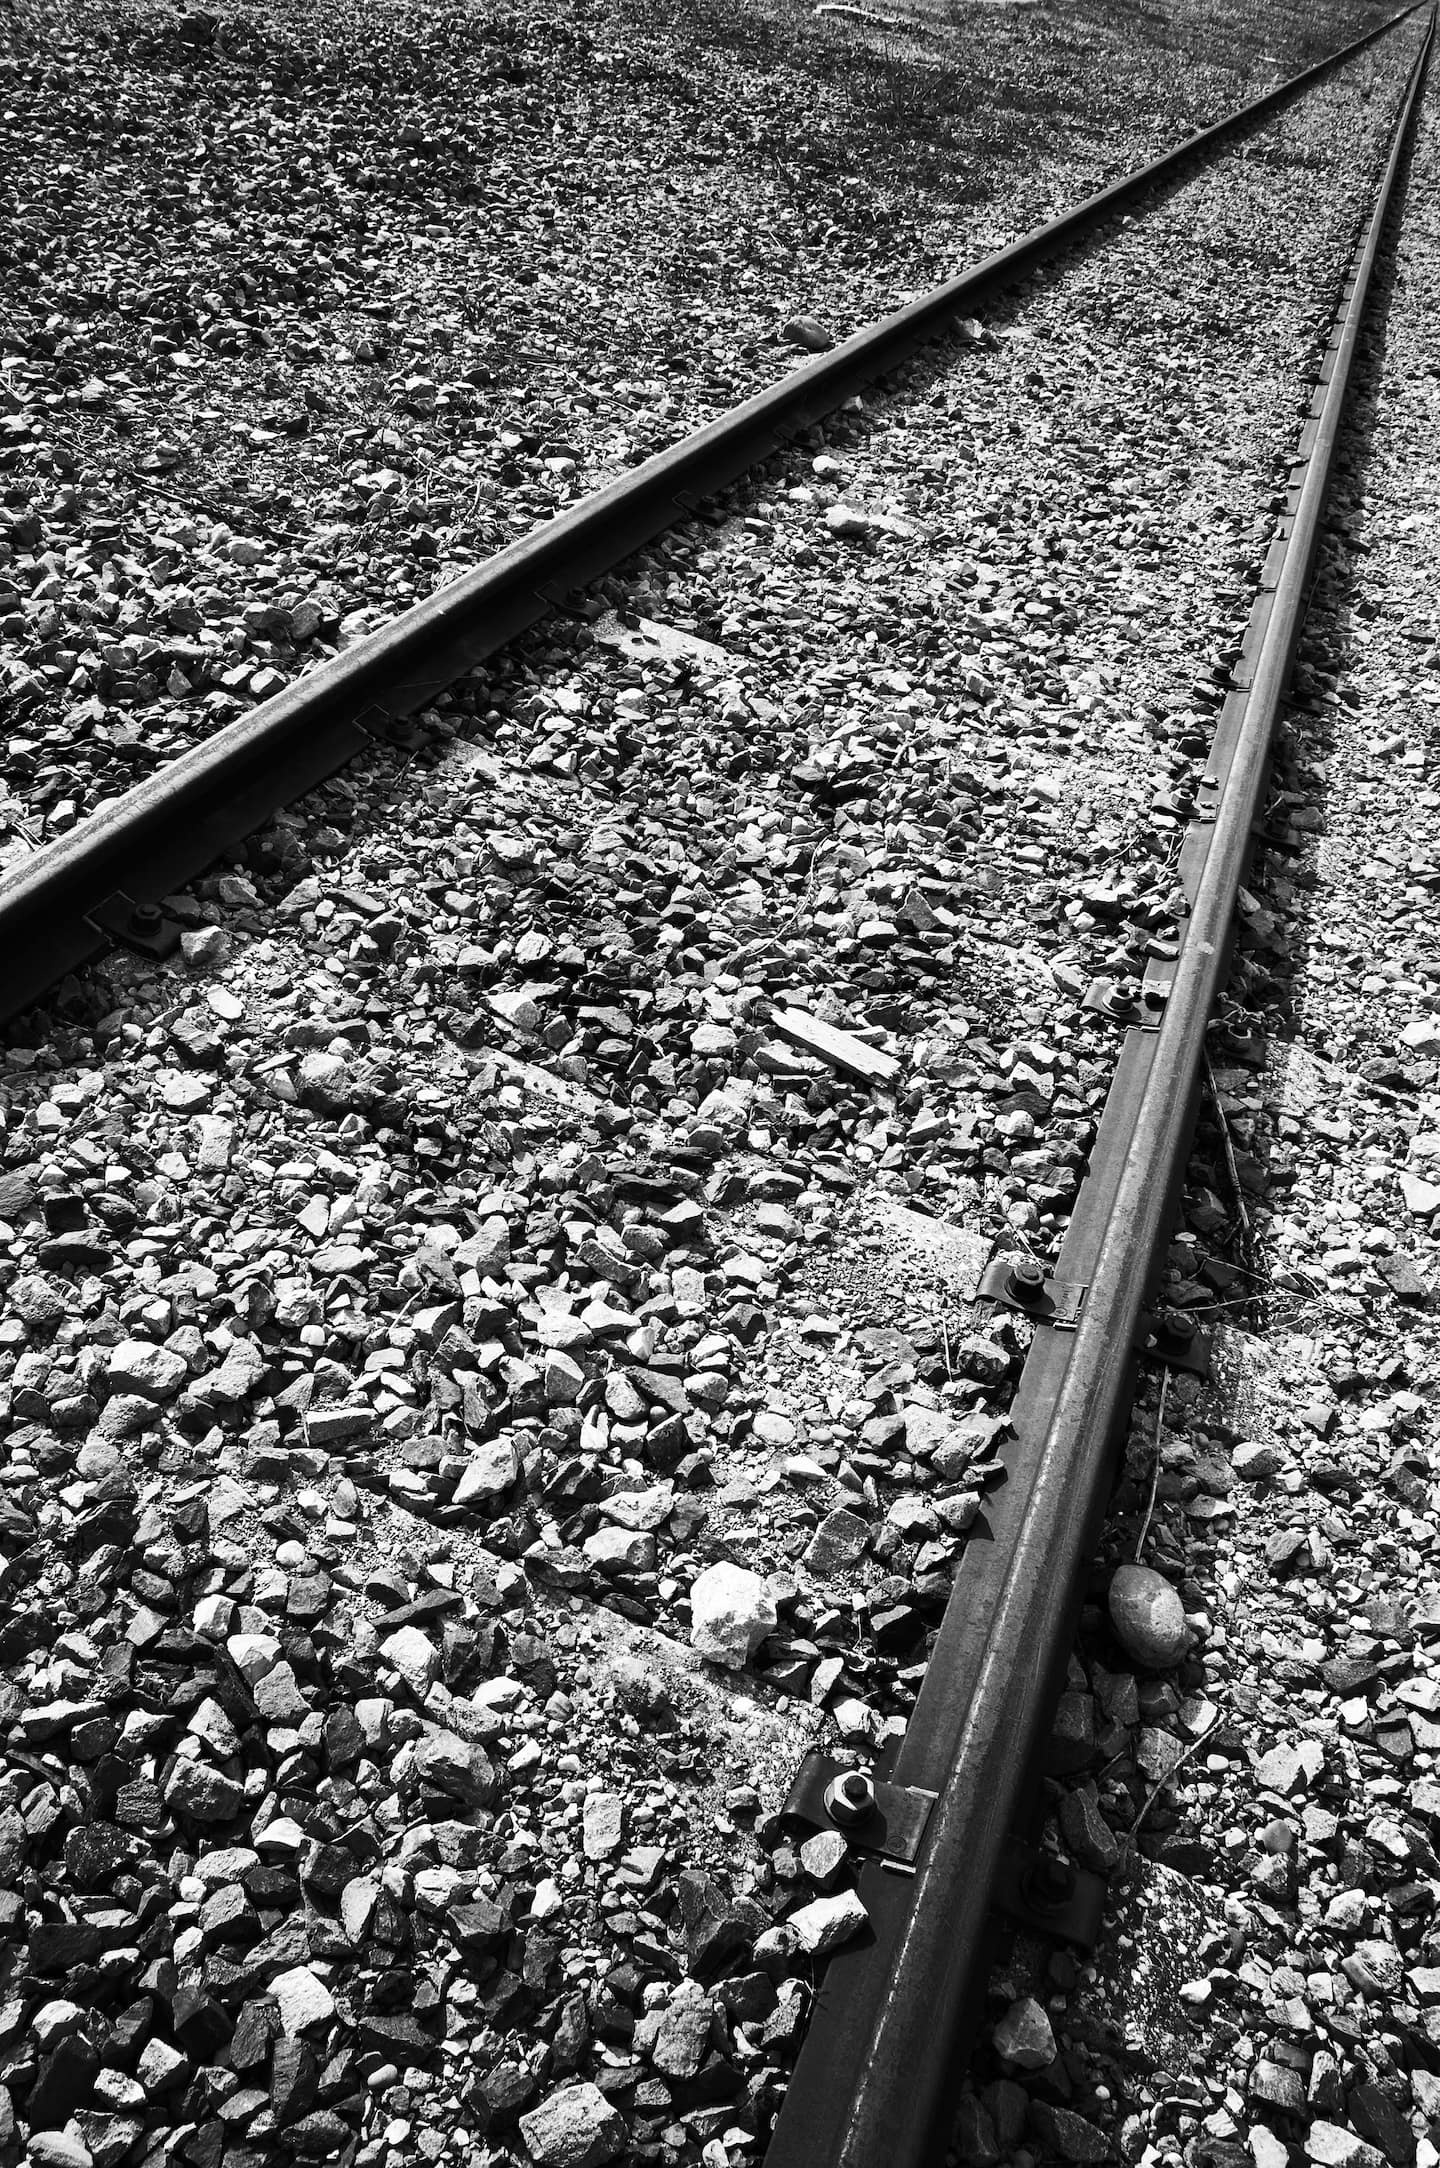 Toronto: three young people come close to death while crossing a railway